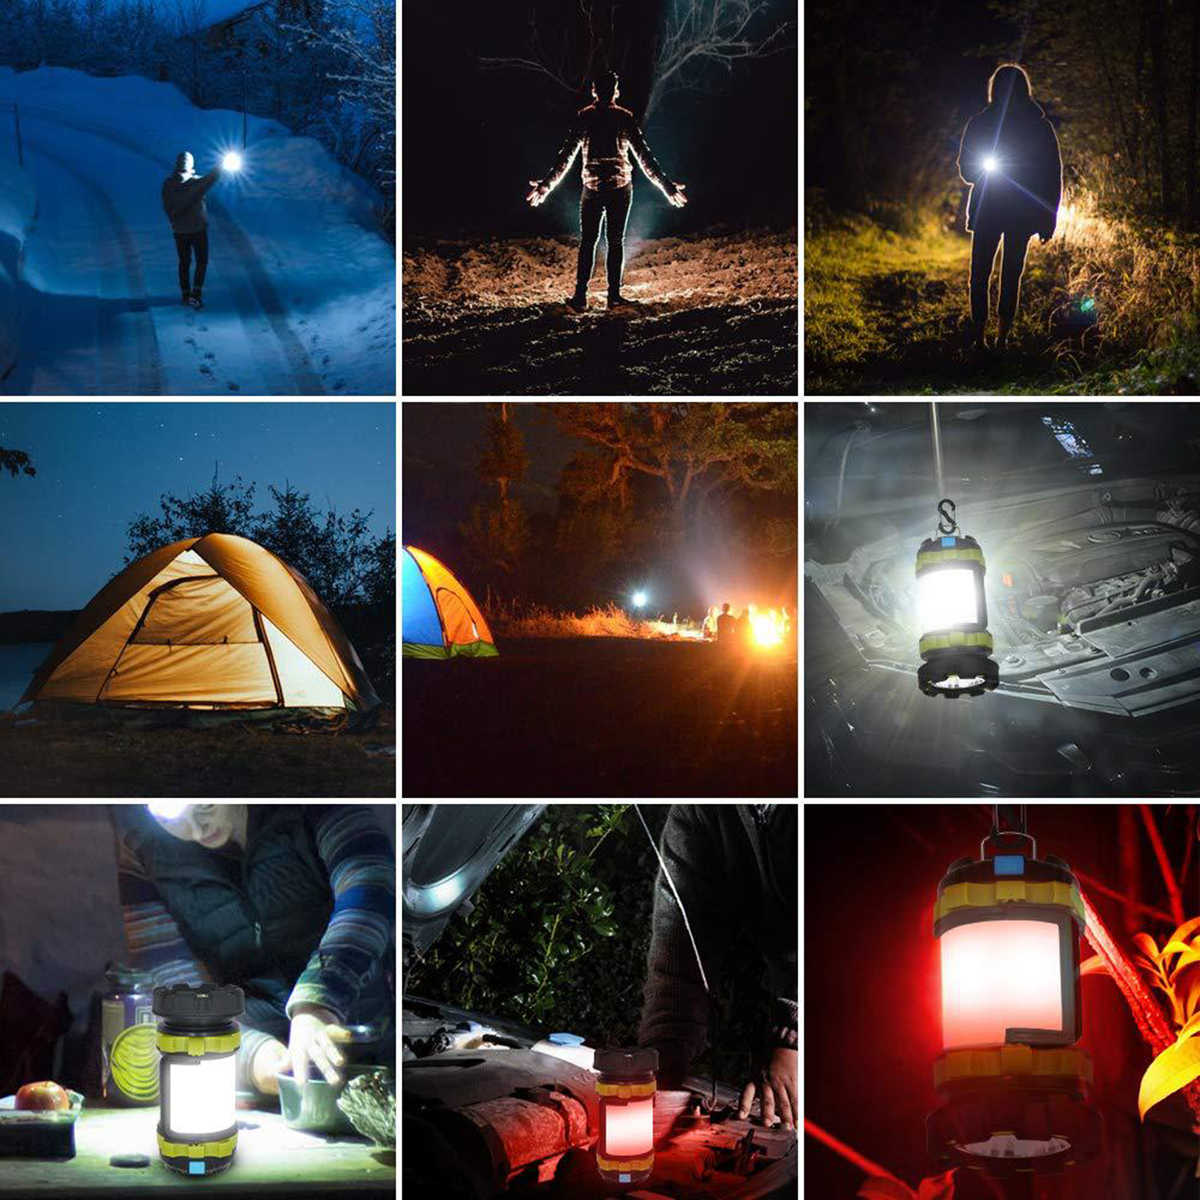 LED-Flashlight-Camping-Light-Torch-Lantern-USB-Rechargeable-USB-Charger-Worklight-Waterproof-1612111-6